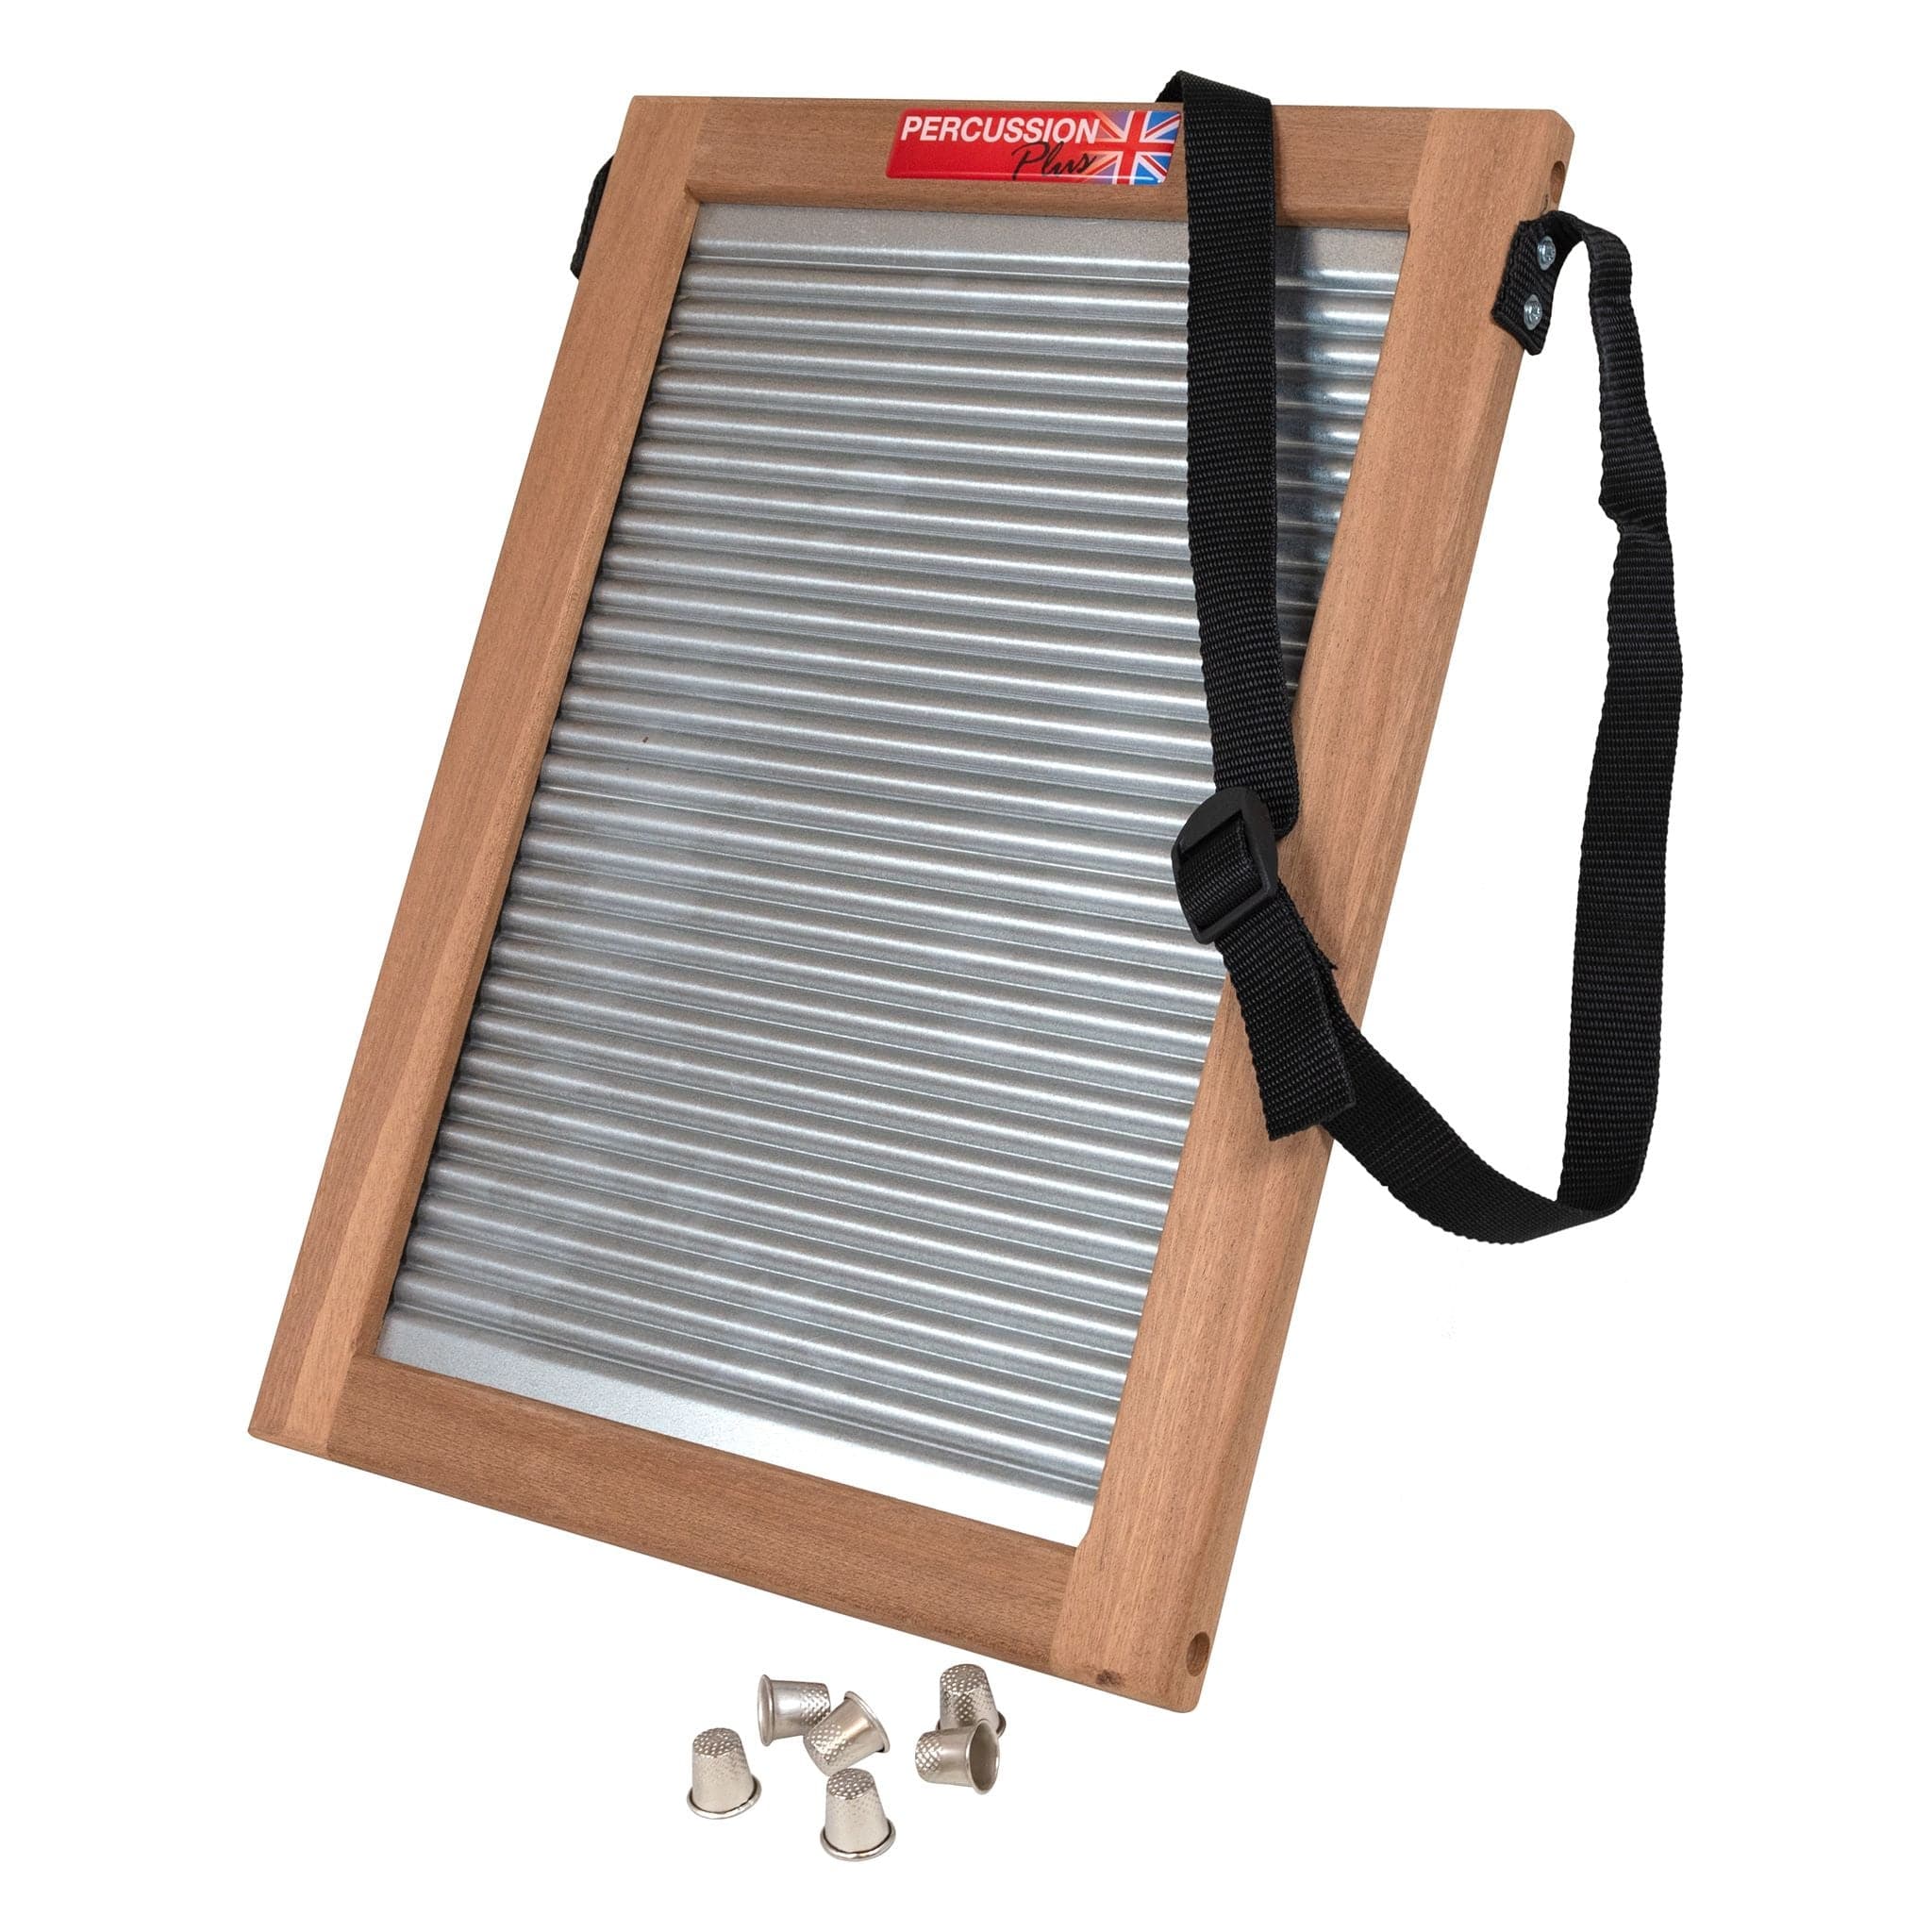 Washboard, This vertical Percussion Plus washboard is for anyone as reading music is not a requirement, you just need the enthusiasm to make it! Simply drag your dominant hand across the board for the strong beats, and tap with your other hand in-between to create your first pattern. You can also use wooden spoons or drum sticks to create different sounds, whichever suits your style best. The purposefully simple frame of the vertical washboard allows you to customise in any way. With the addition of horns, 